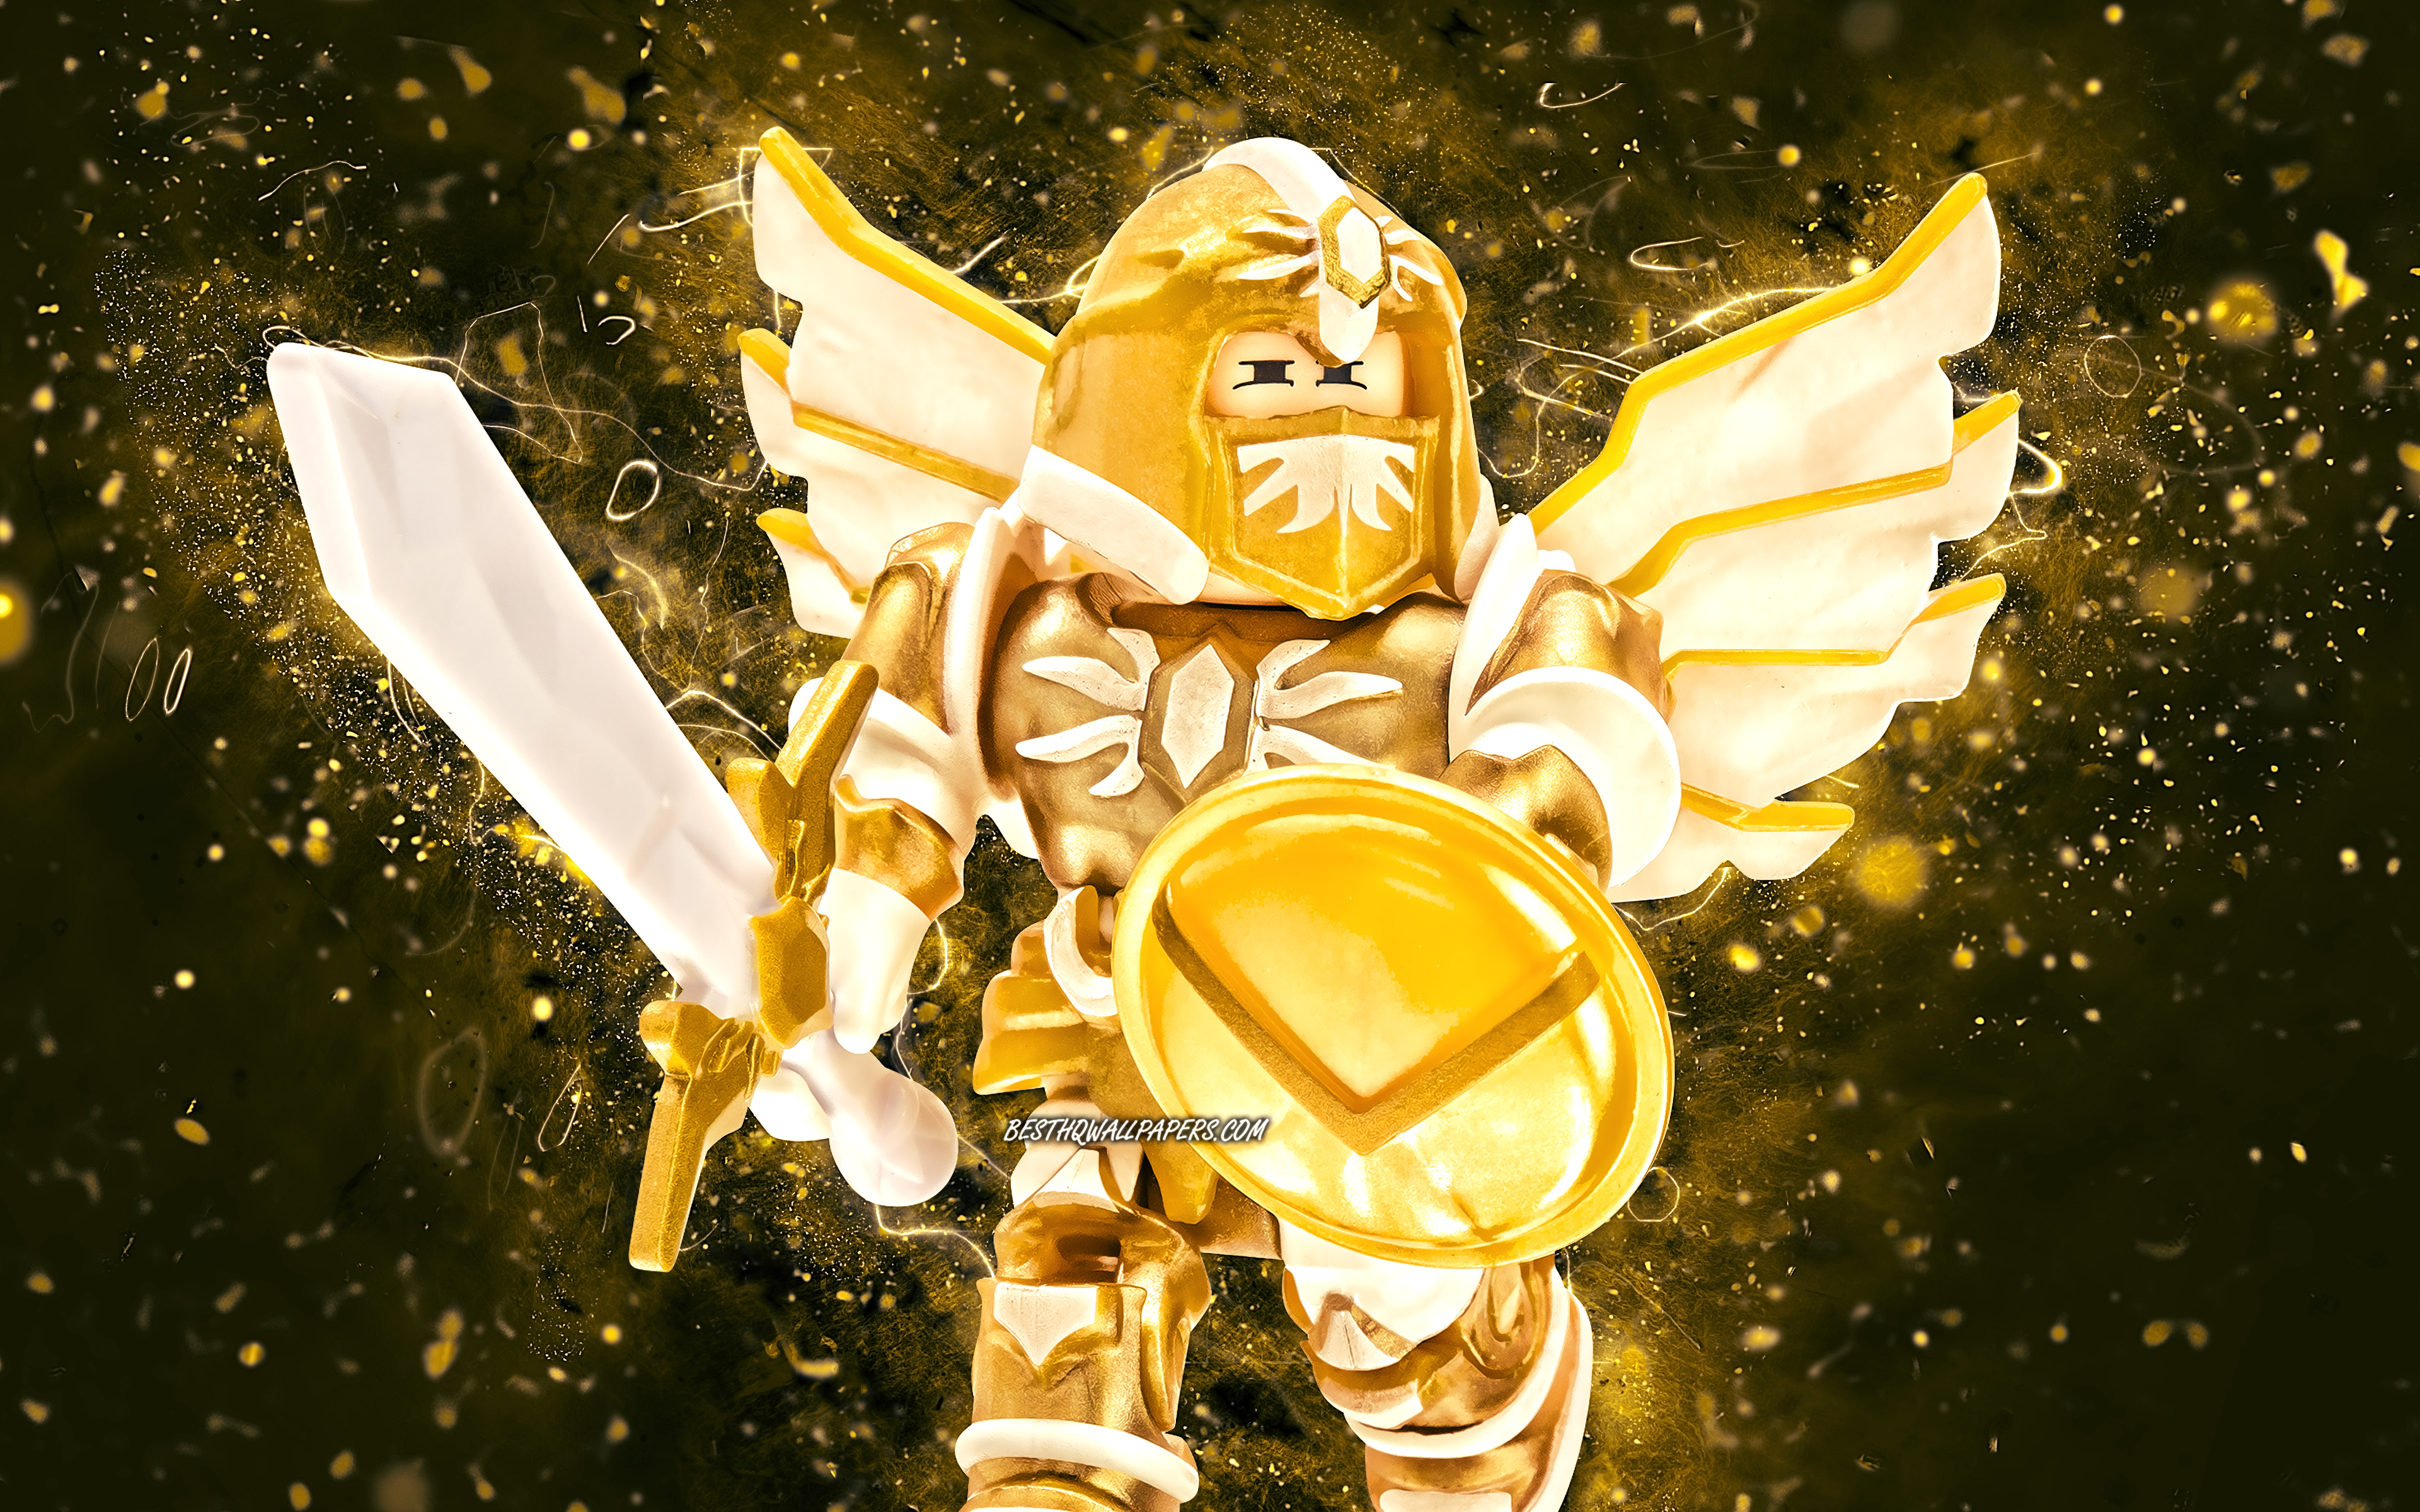 Download wallpaper Sun Slayer, 4K, yellow neon lights, Roblox, fan art, Roblox characters, Rodny Roblox, Sun Slayer Roblox for desktop with resolution 3840x2400. High Quality HD picture wallpaper